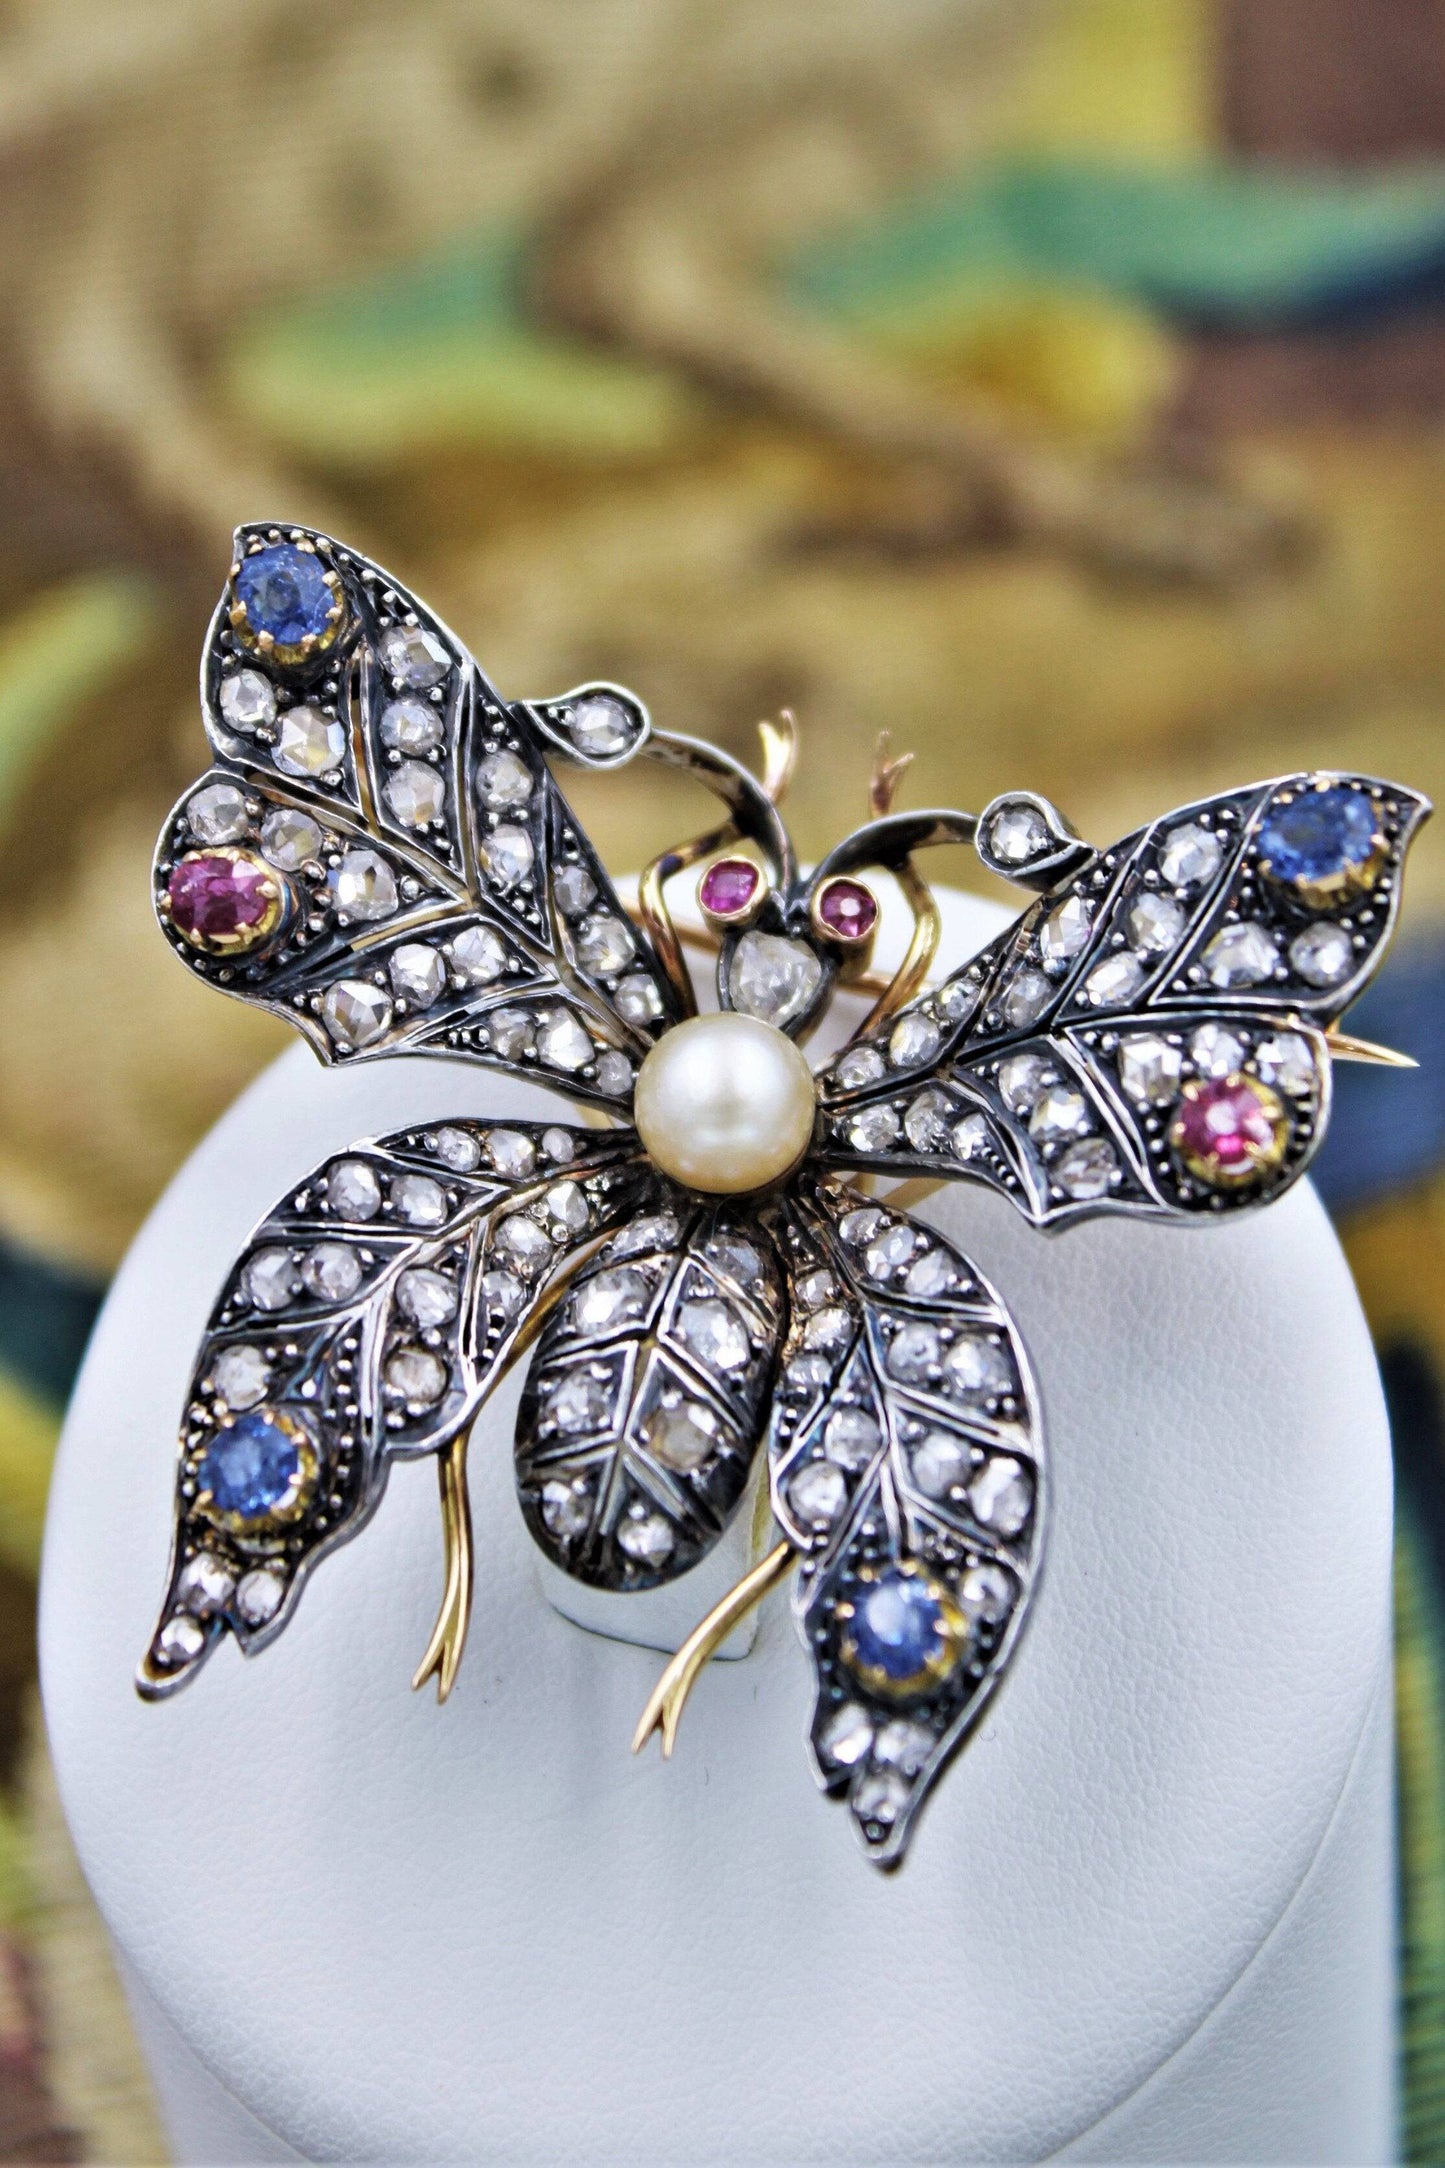 An exceptional Pearl, Ruby, Sapphire & Diamond Butterfly Brooch in Silver Tipped 18 Carat Yellow Gold, French, Circa 1880 - Robin Haydock Antiques